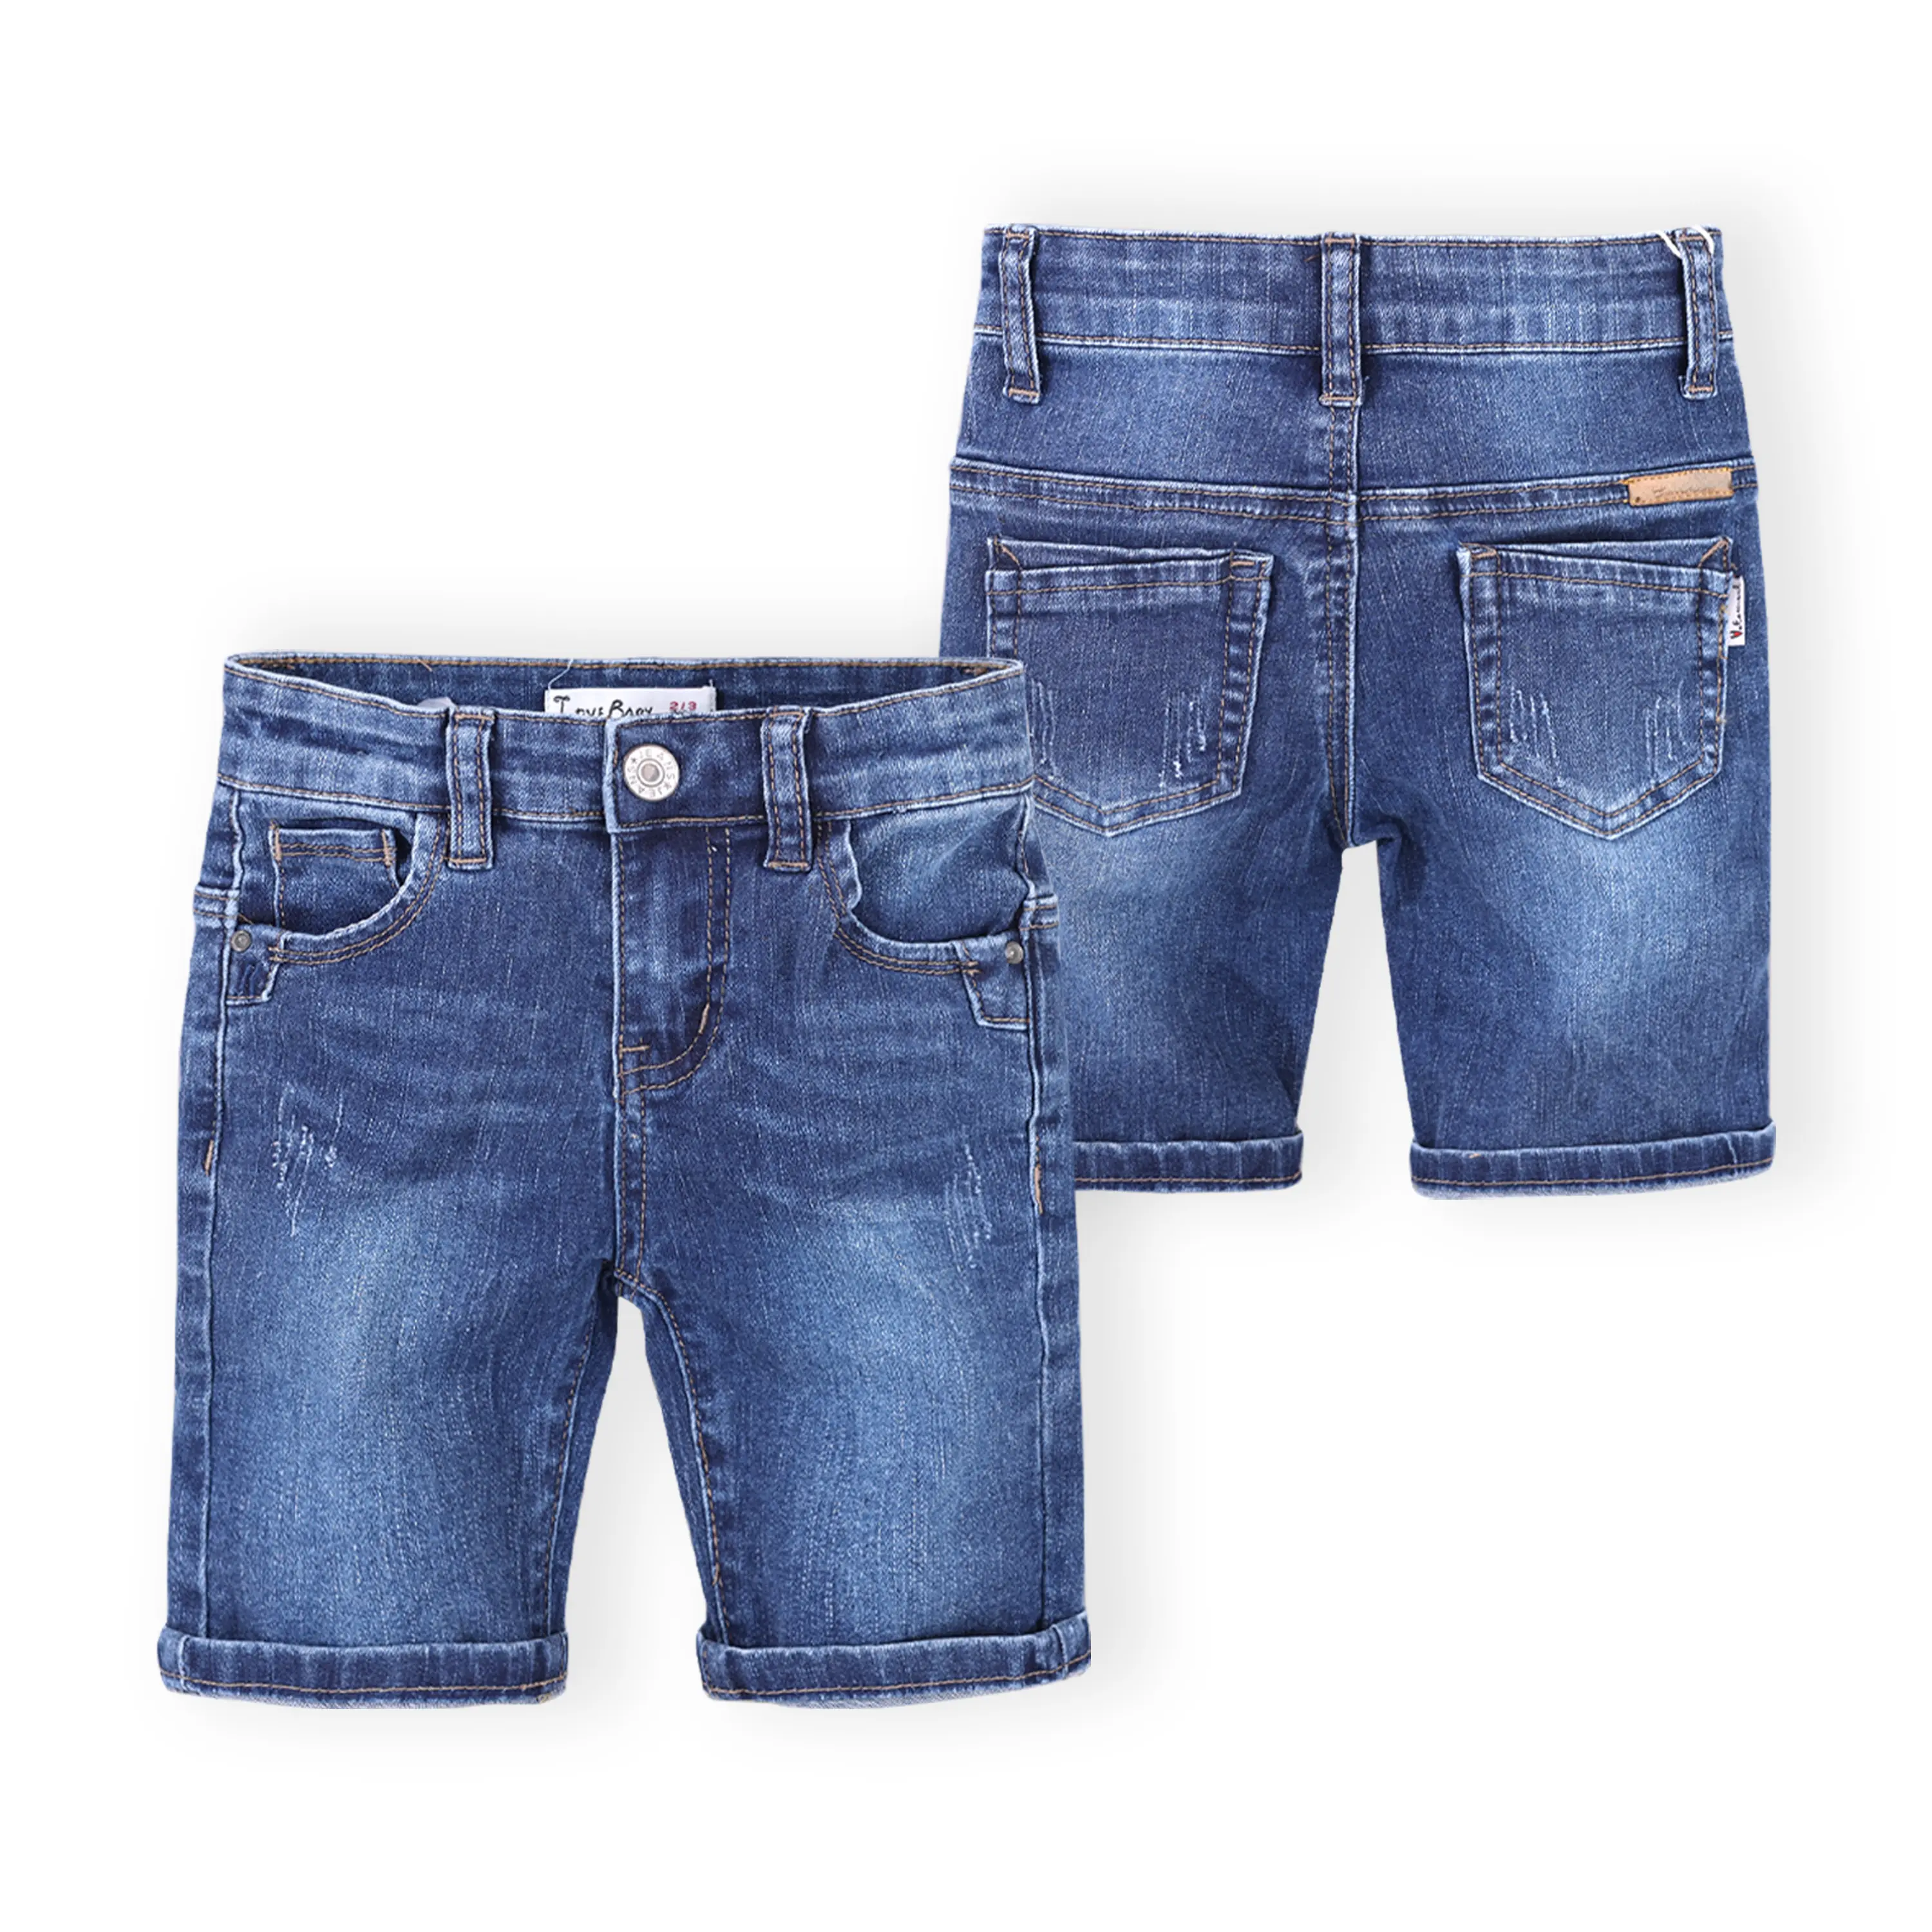 Simple style children's wear GuangZhou jeans manufacturers washed denim toddler jean shorts for boy